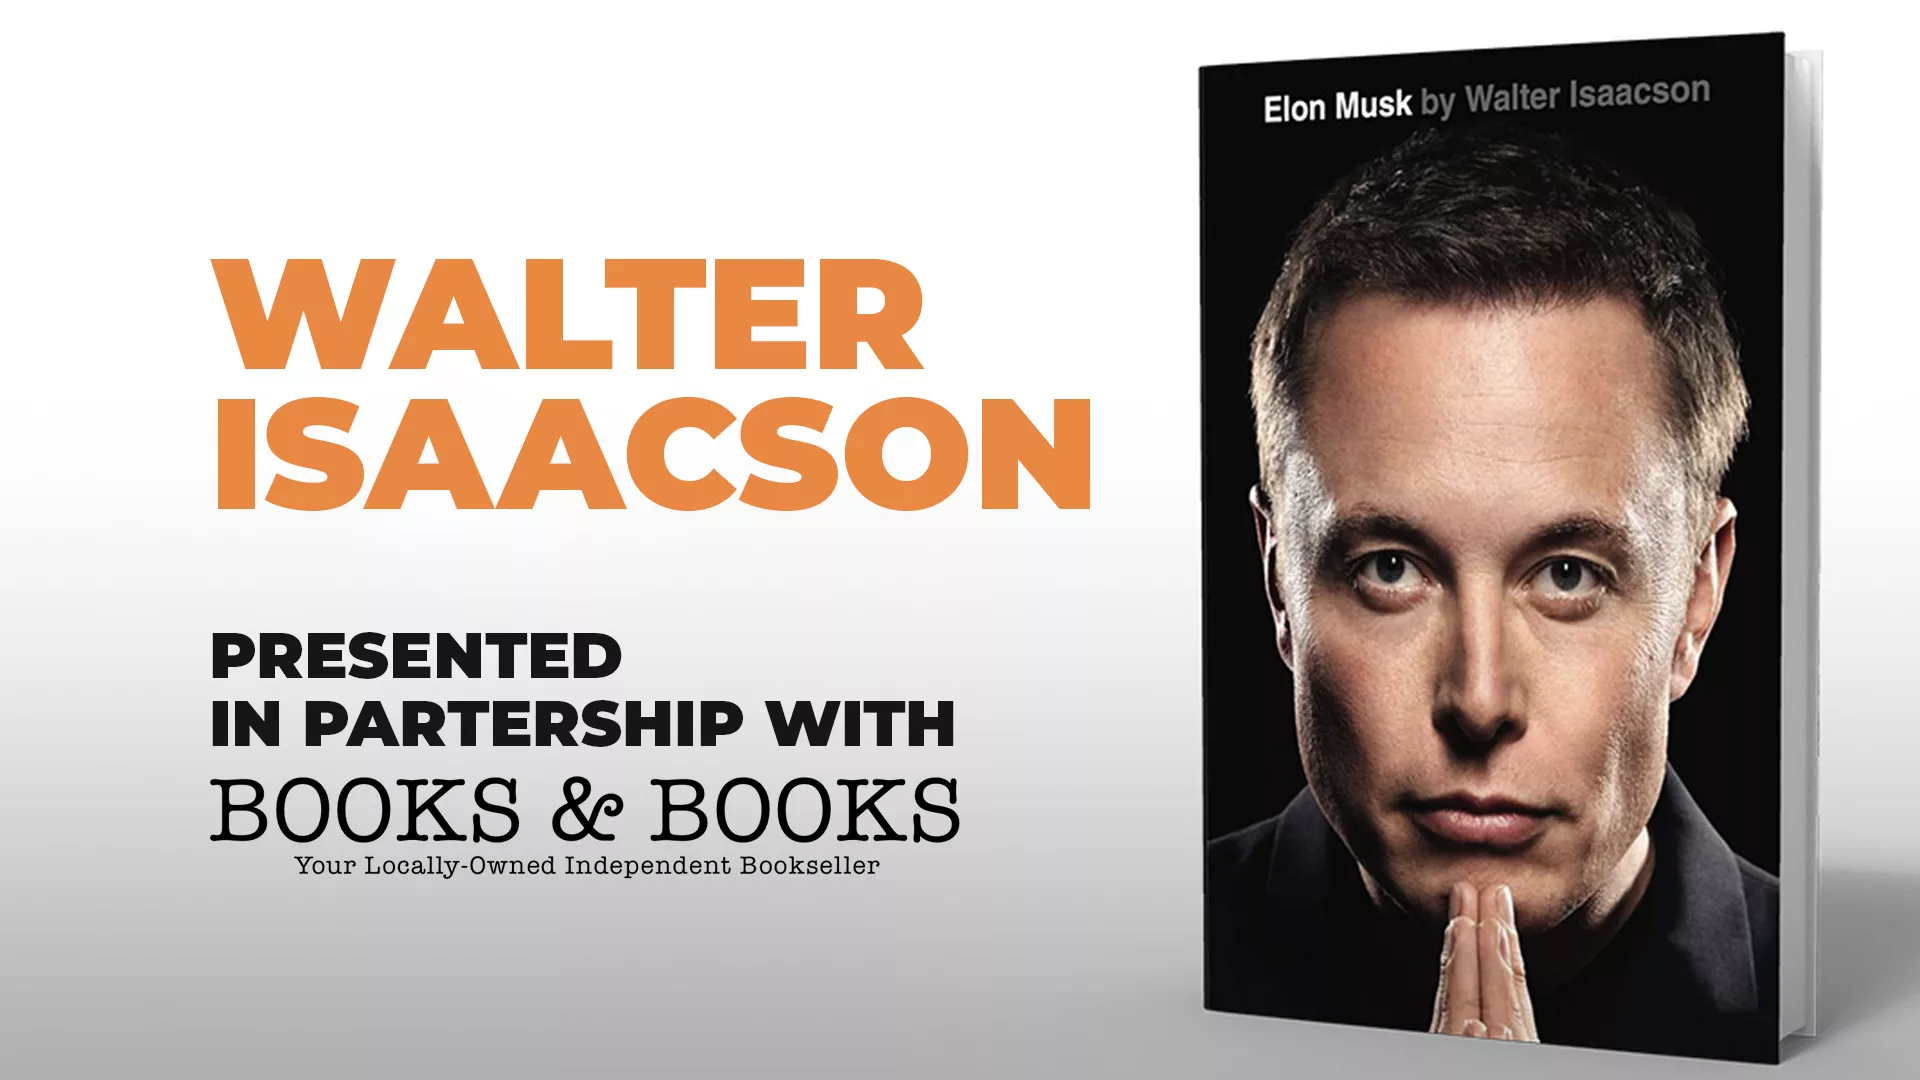 Walter Isaacson Presented in Association with books and books elon musk book banner